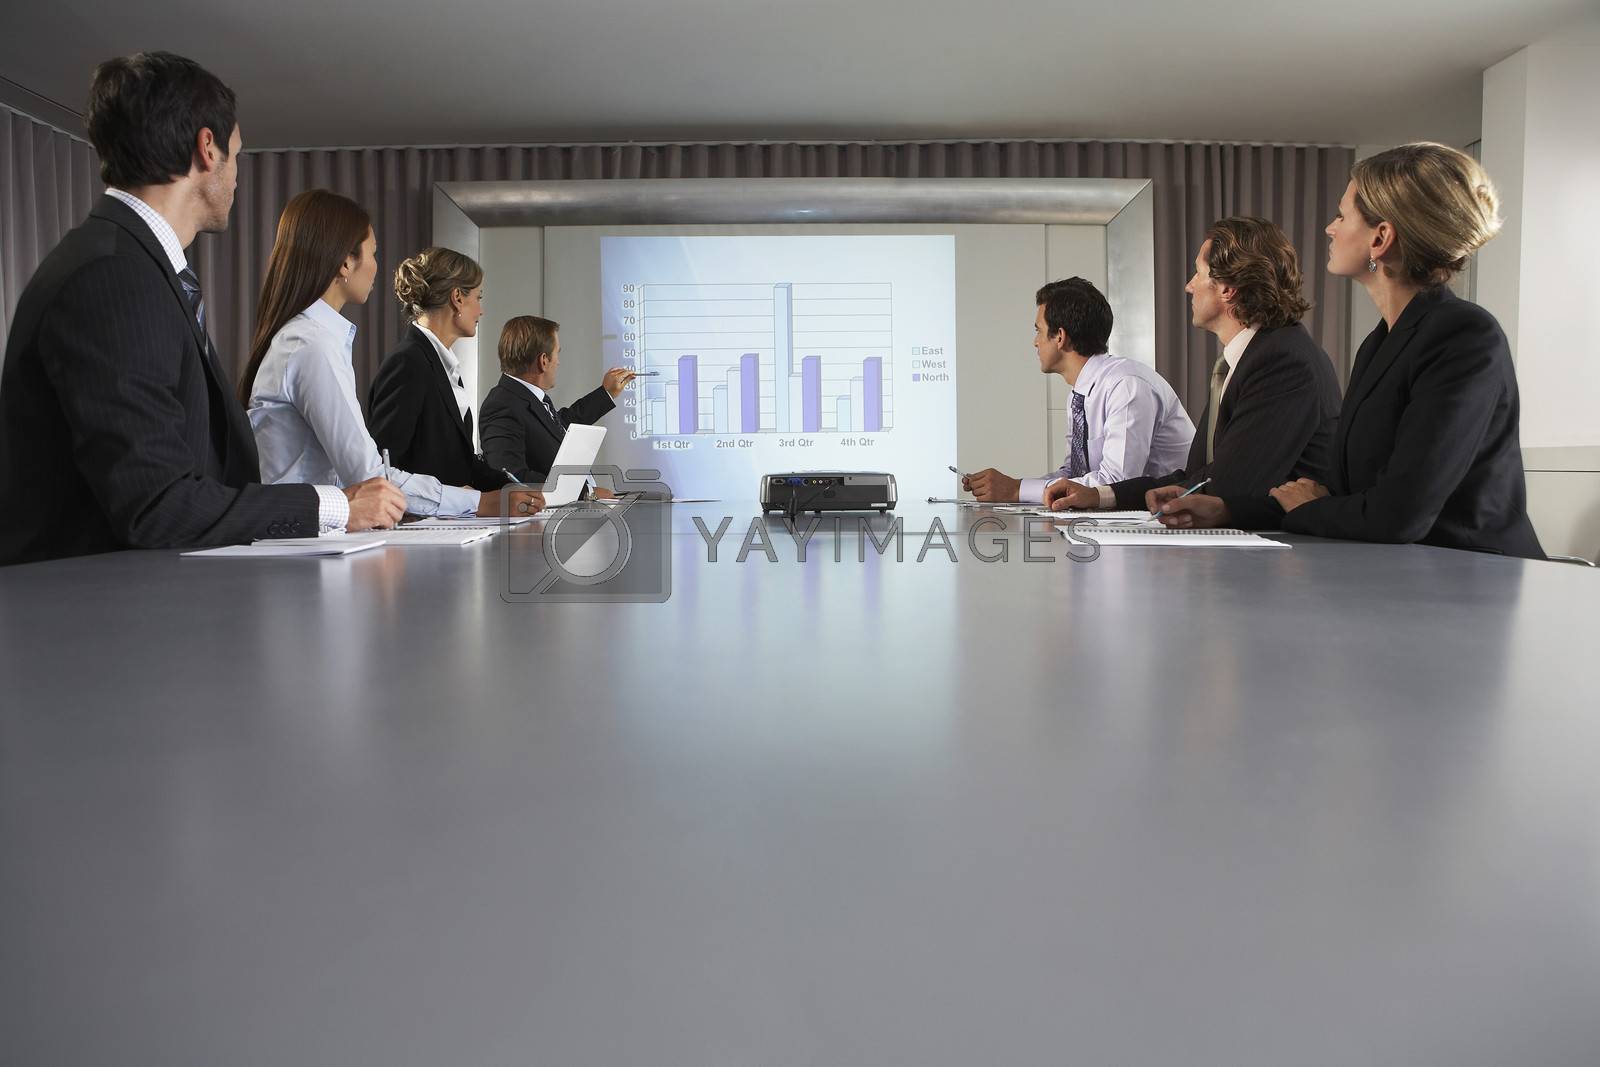 Royalty free image of Businessman Giving Presentation in Conference Room by moodboard